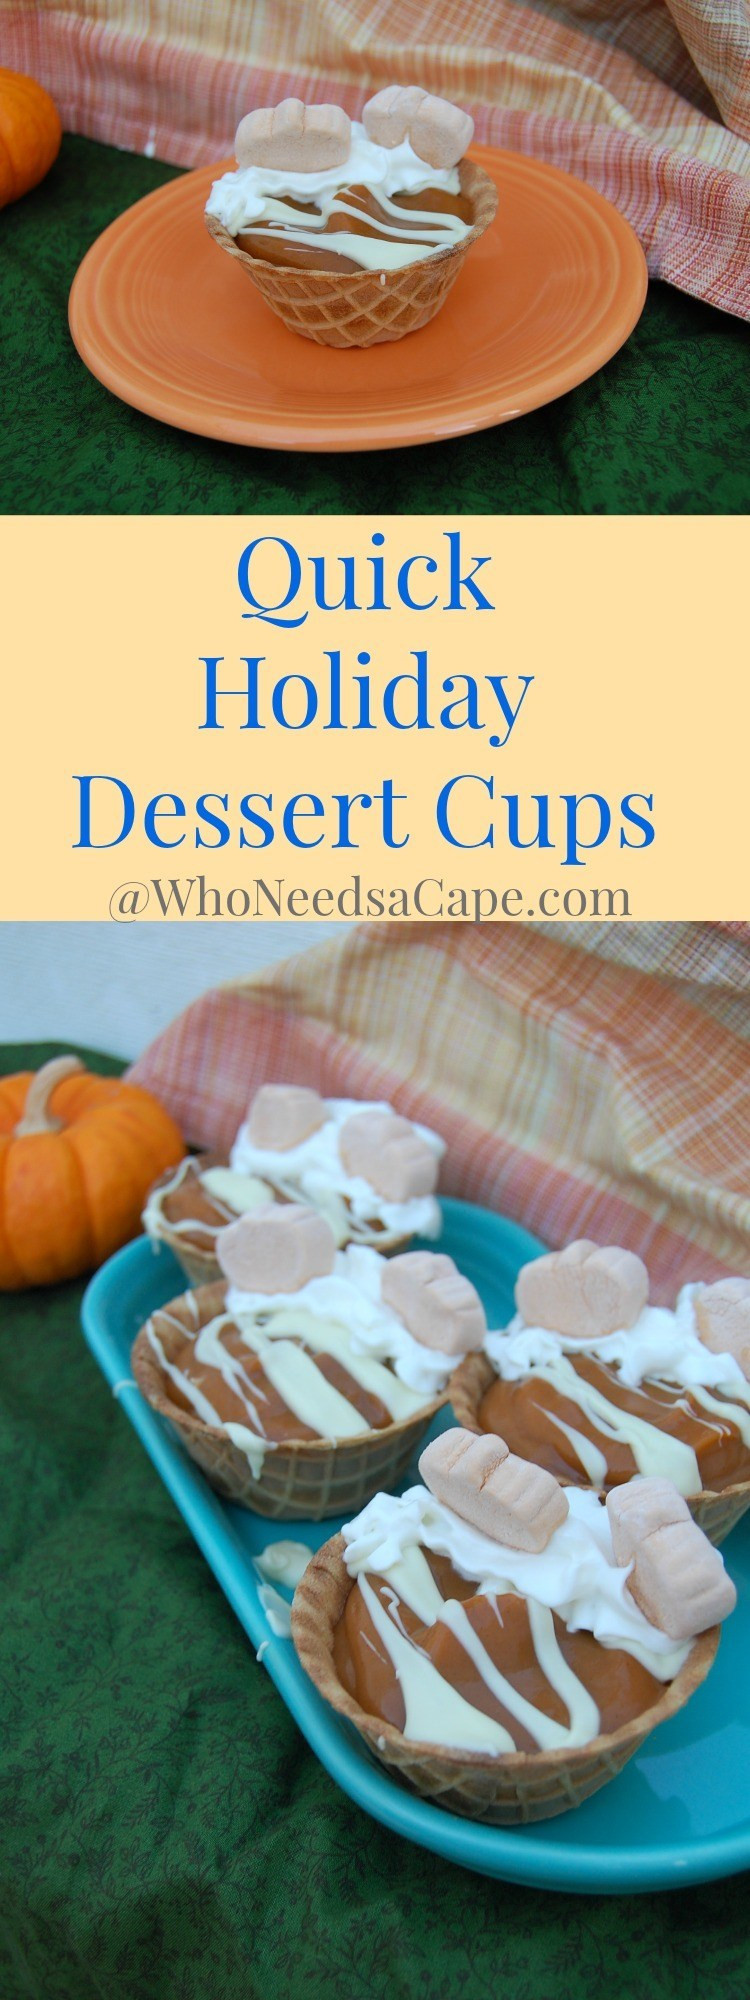 Quick Christmas Desserts
 Quick Holiday Dessert Cups Who Needs A Cape